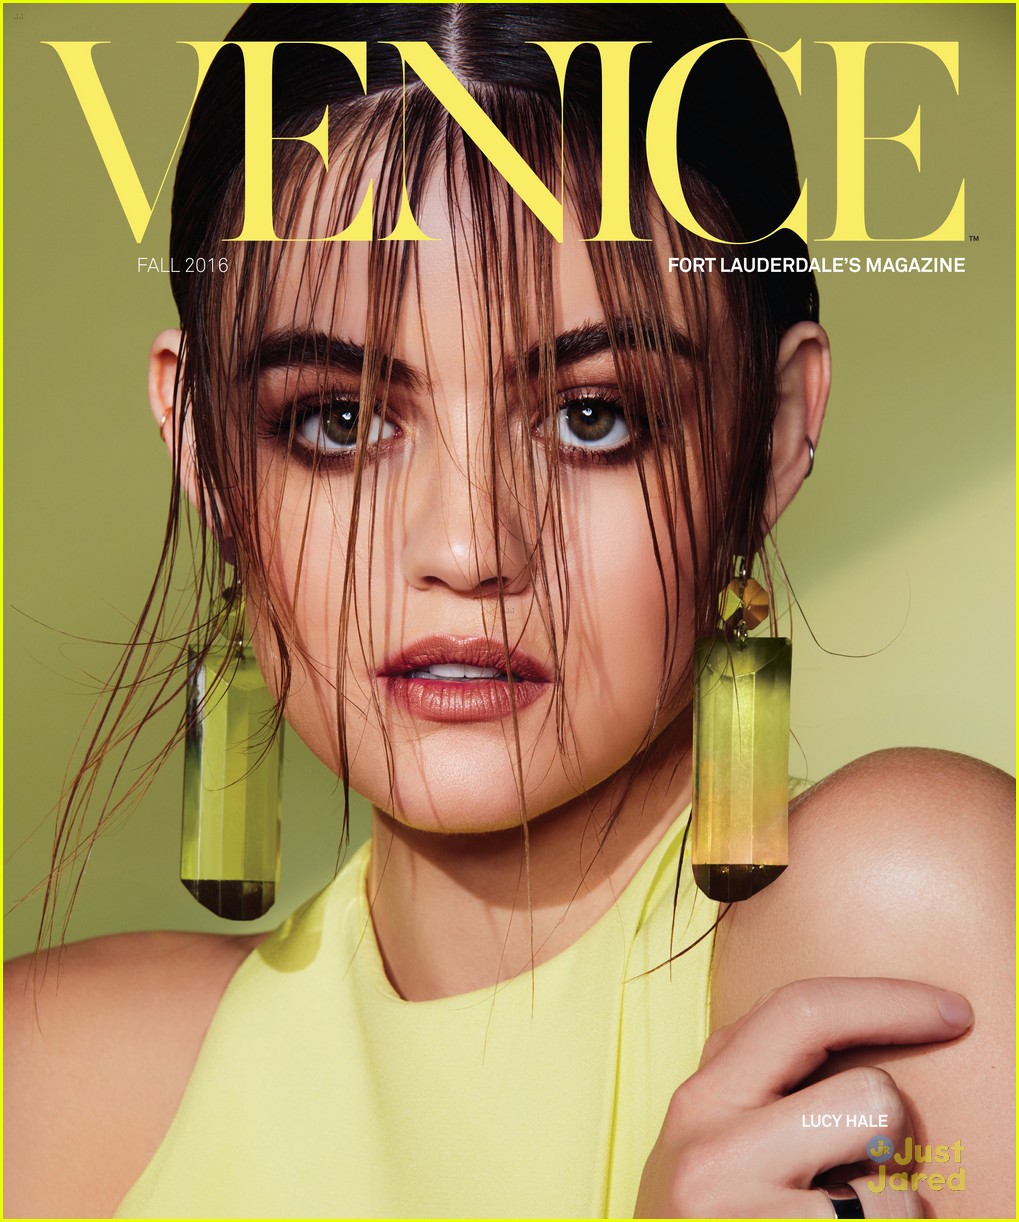 lucy hale venice ftl cover story 02